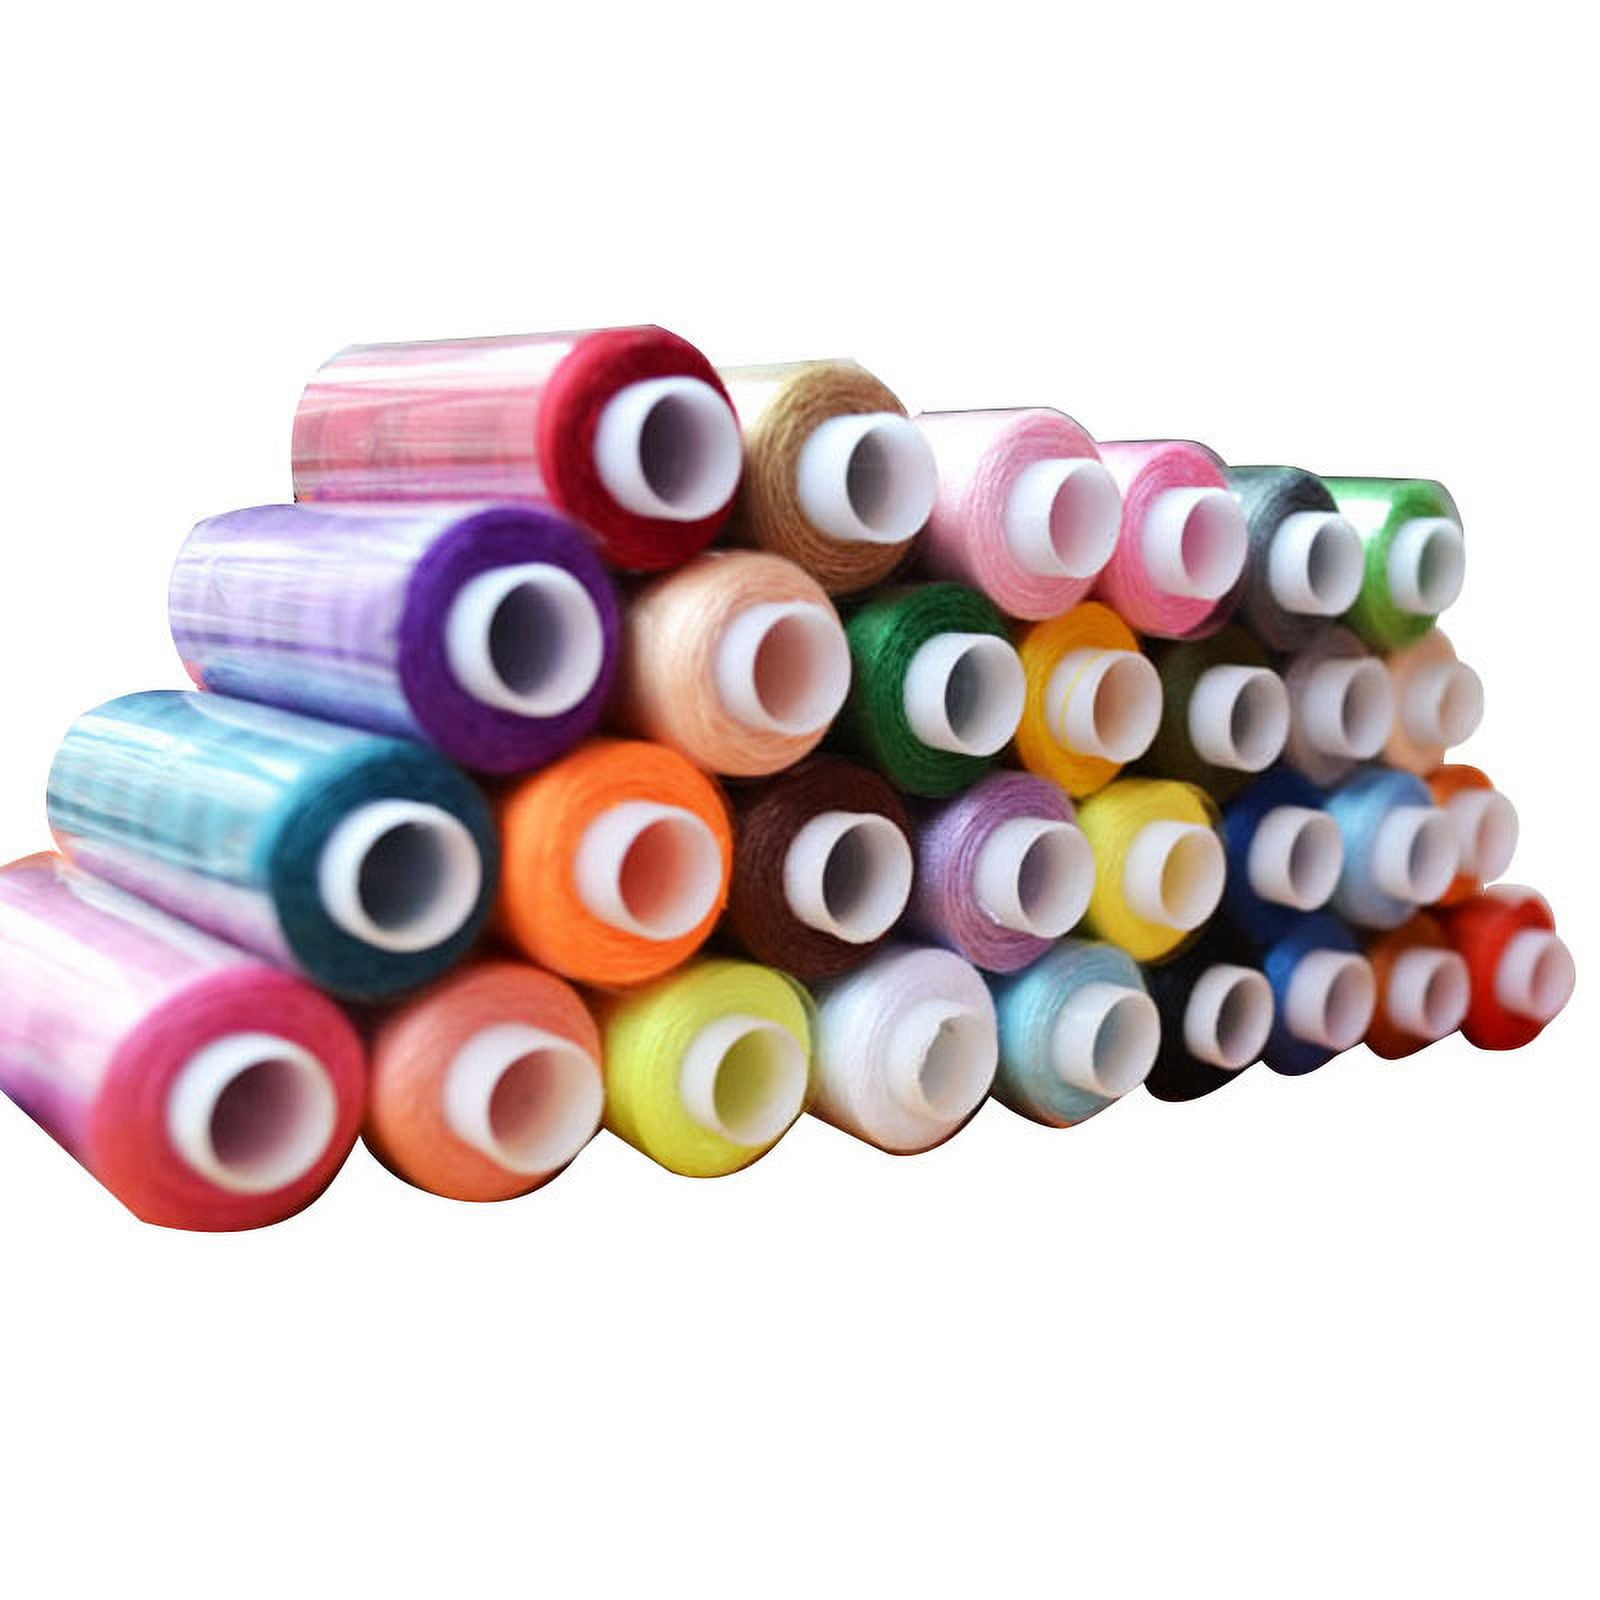 GetUSCart- CiaraQ Sewing Threads Kits 30 Colors Polyester 250 Yards Per  Spools for Hand Sewing & Embroidery